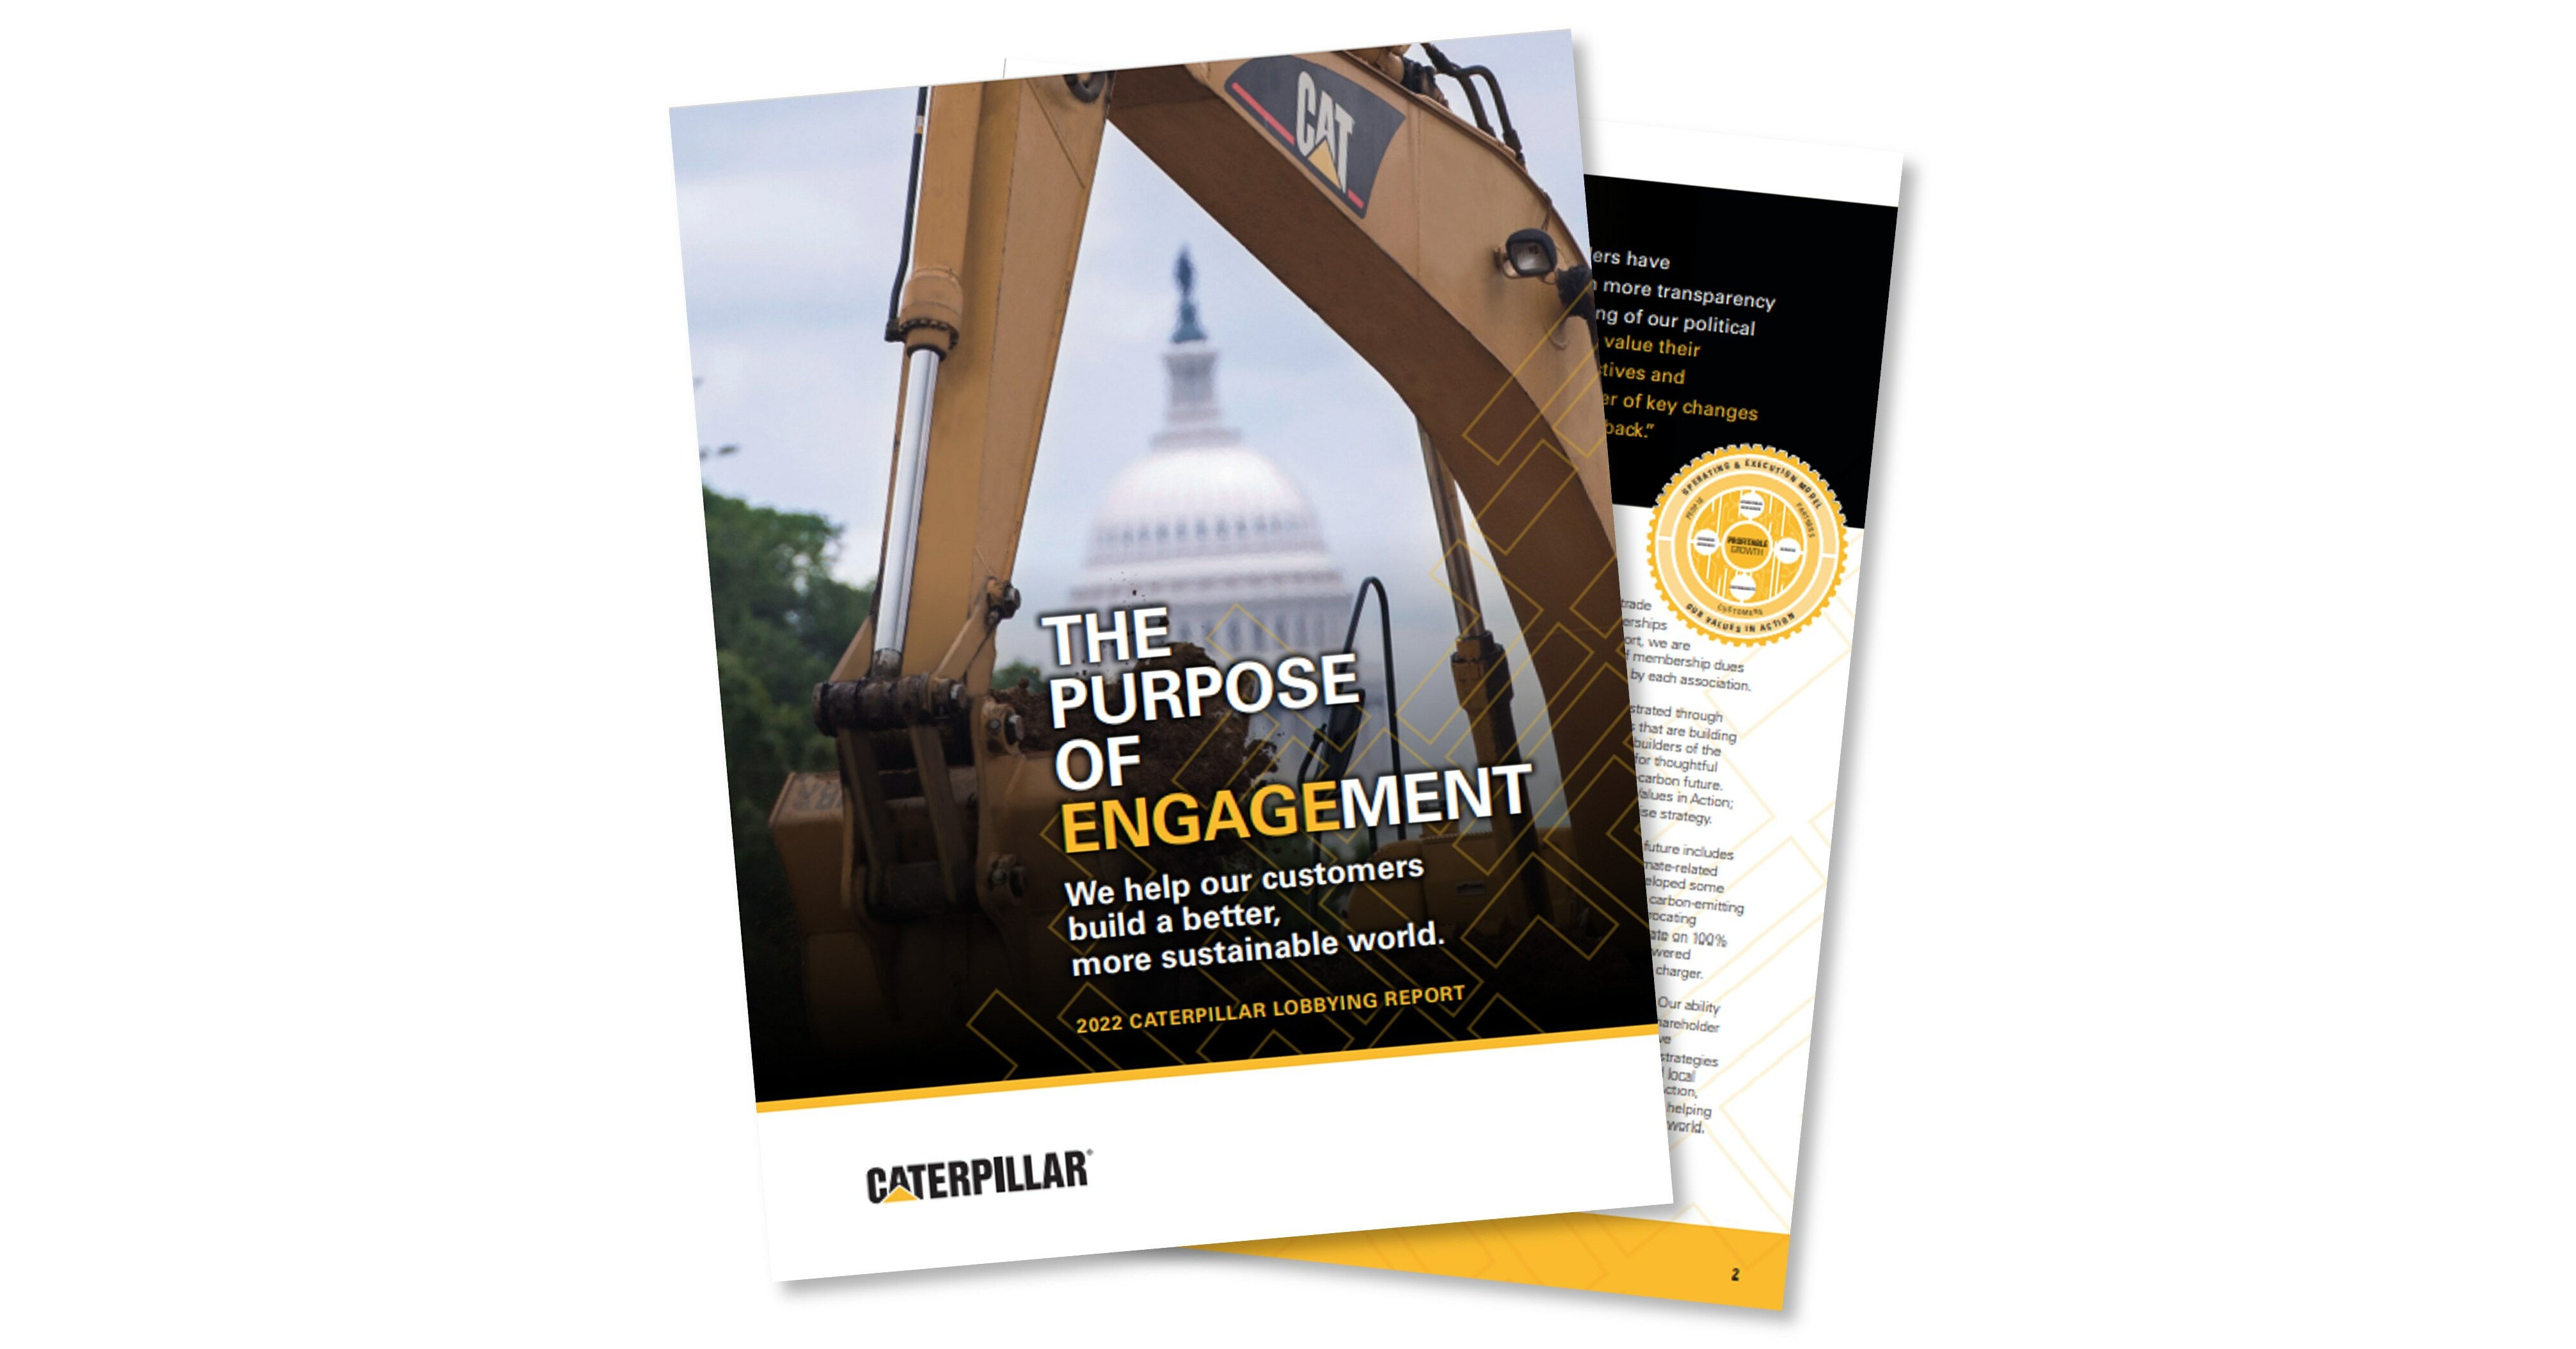 Inaugural Caterpillar 2022 Lobbying Report Highlights Political and Advocacy Efforts That Help Advance Enterprise Strategy